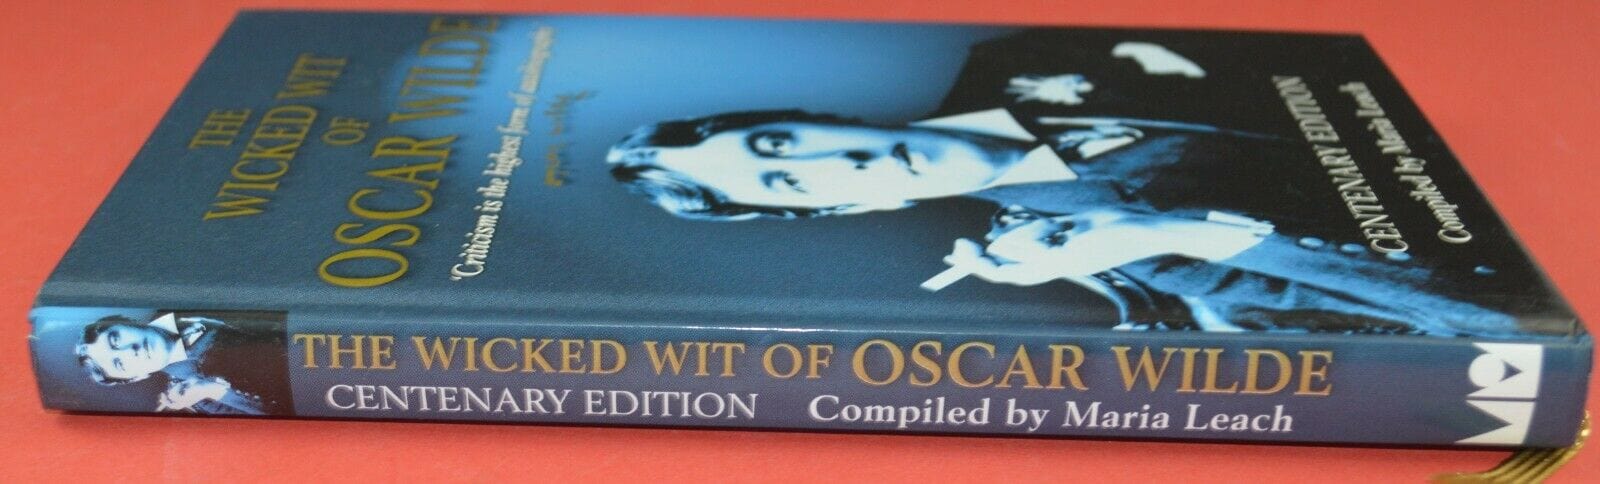 SECONDHAND BOOK THE WICKED WIT OF OSCAR WILDE CENTENARY EDITION(PREVIOUSLY OWNED)GOOD CONDITION - TMD167207